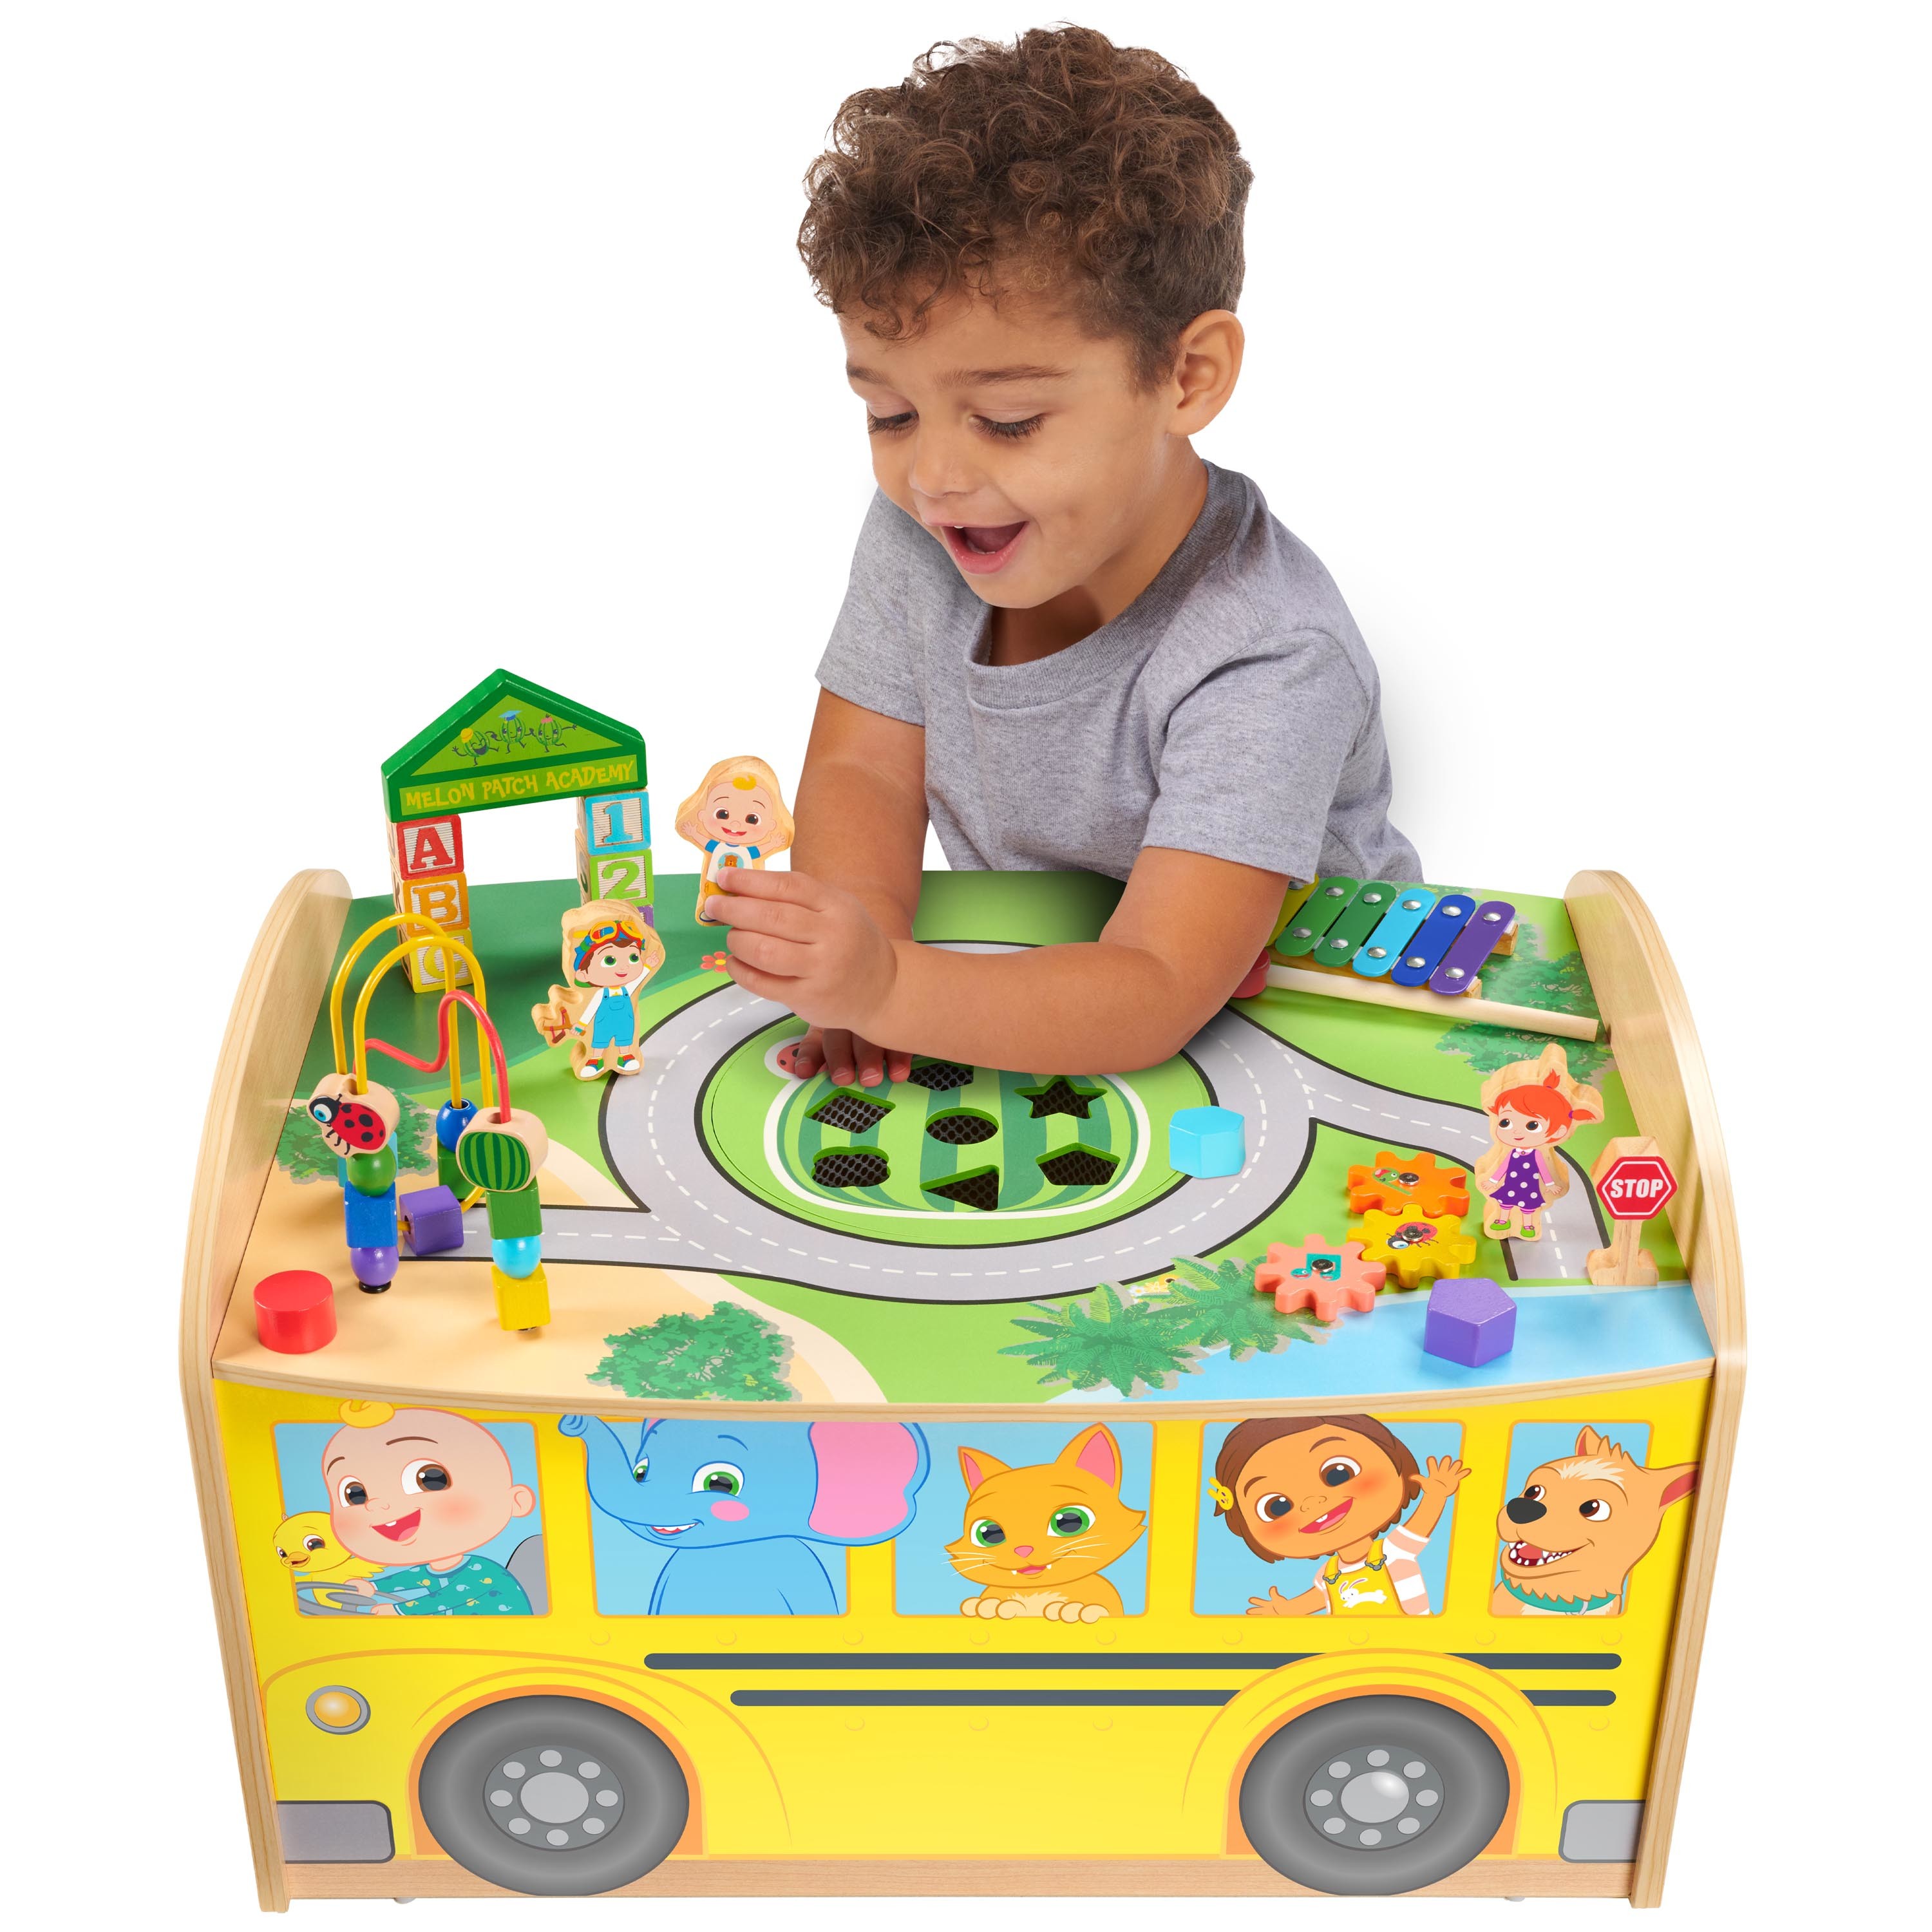 Cocomelon Wheels on the Bus Wooden Activity Table, Recycled Wood, for Toddlers 18 Months+ - image 1 of 7